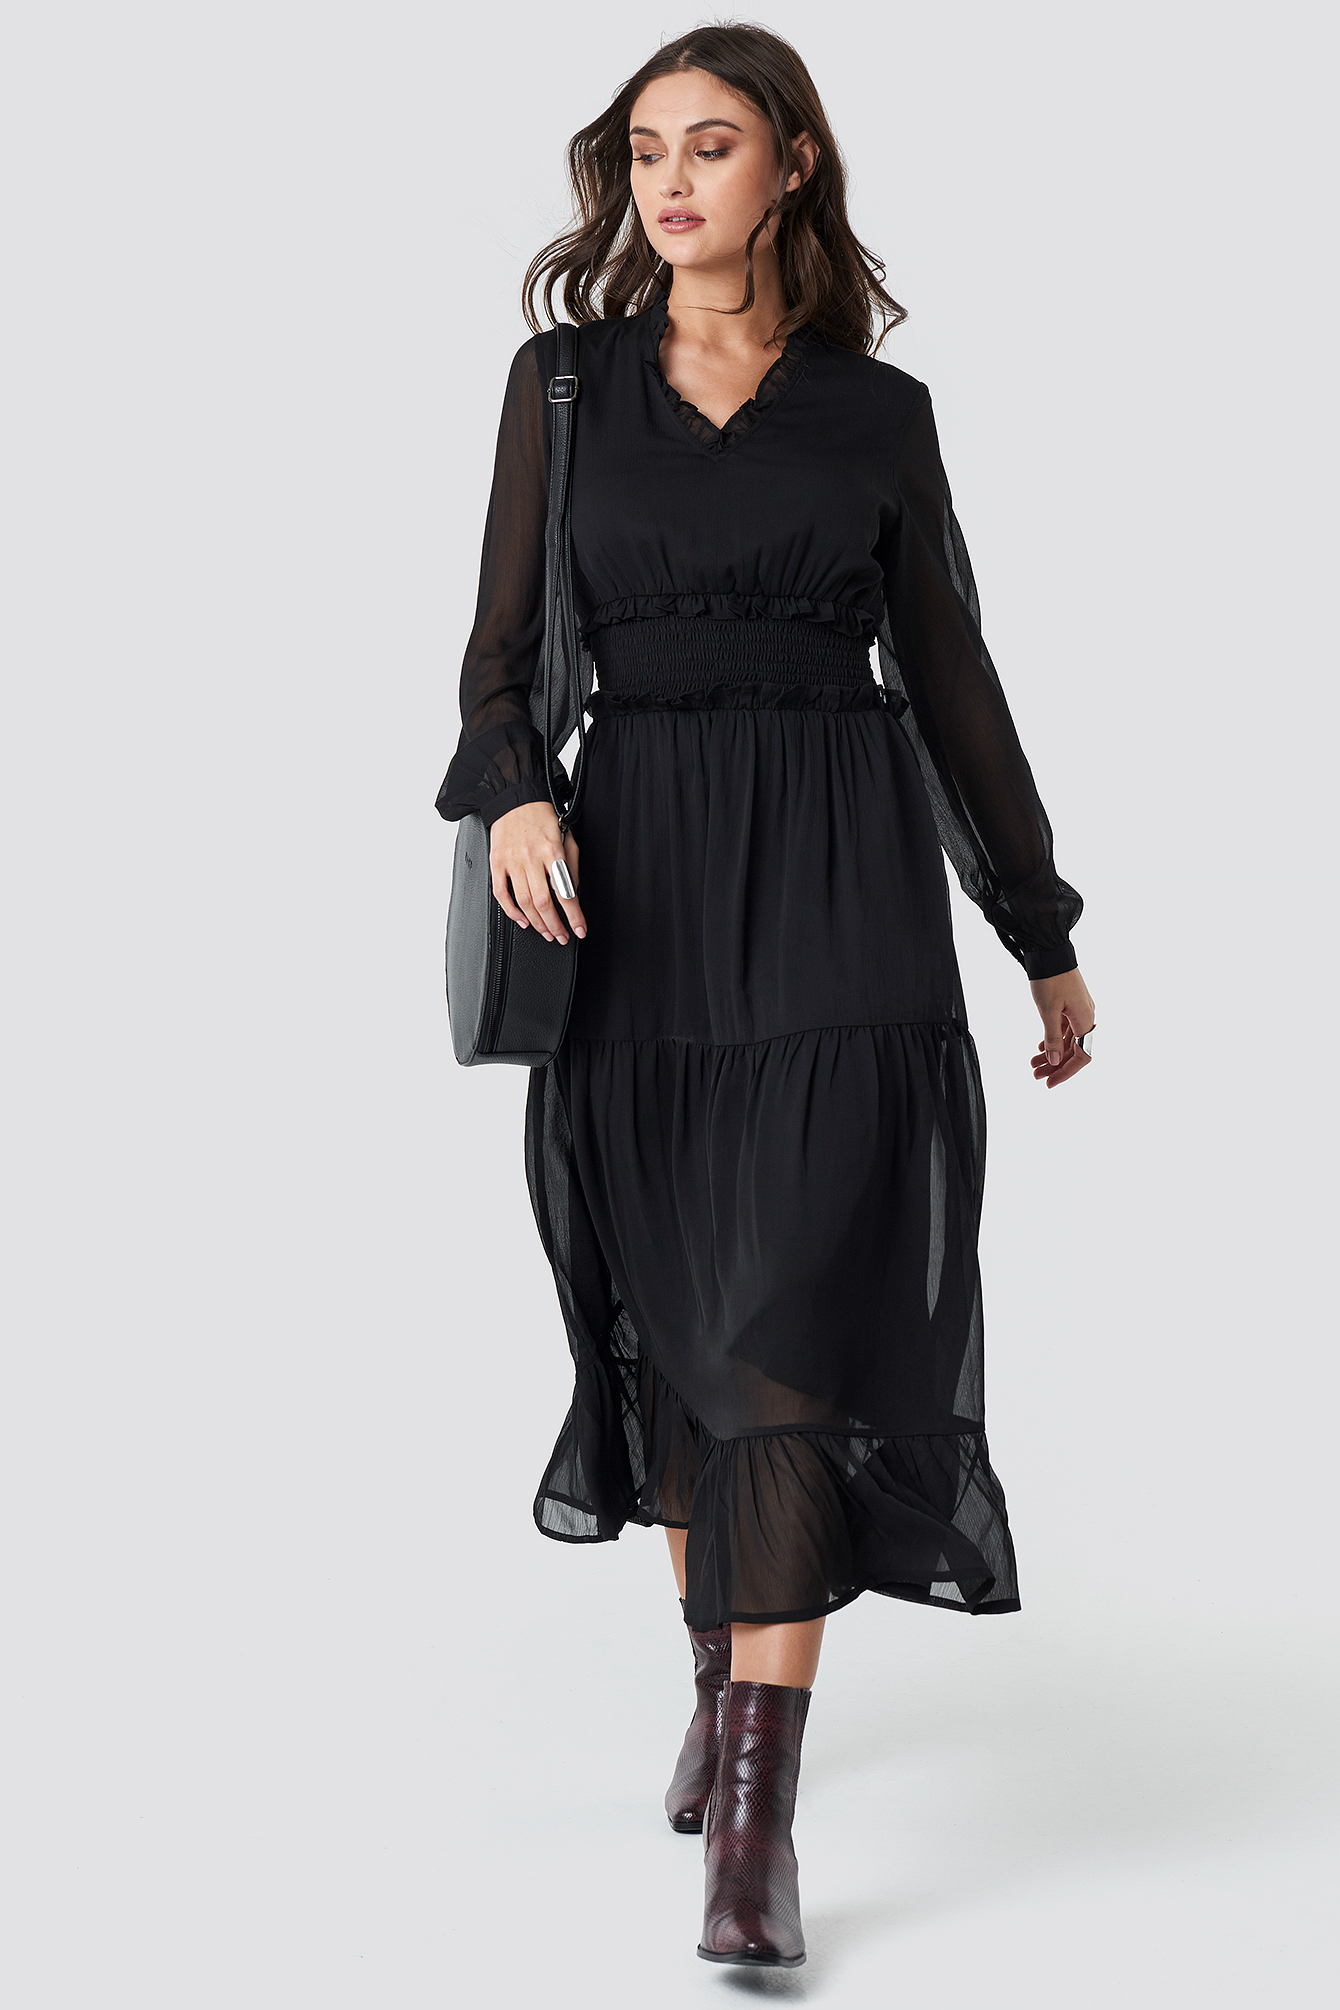 long black flowy dress with sleeves